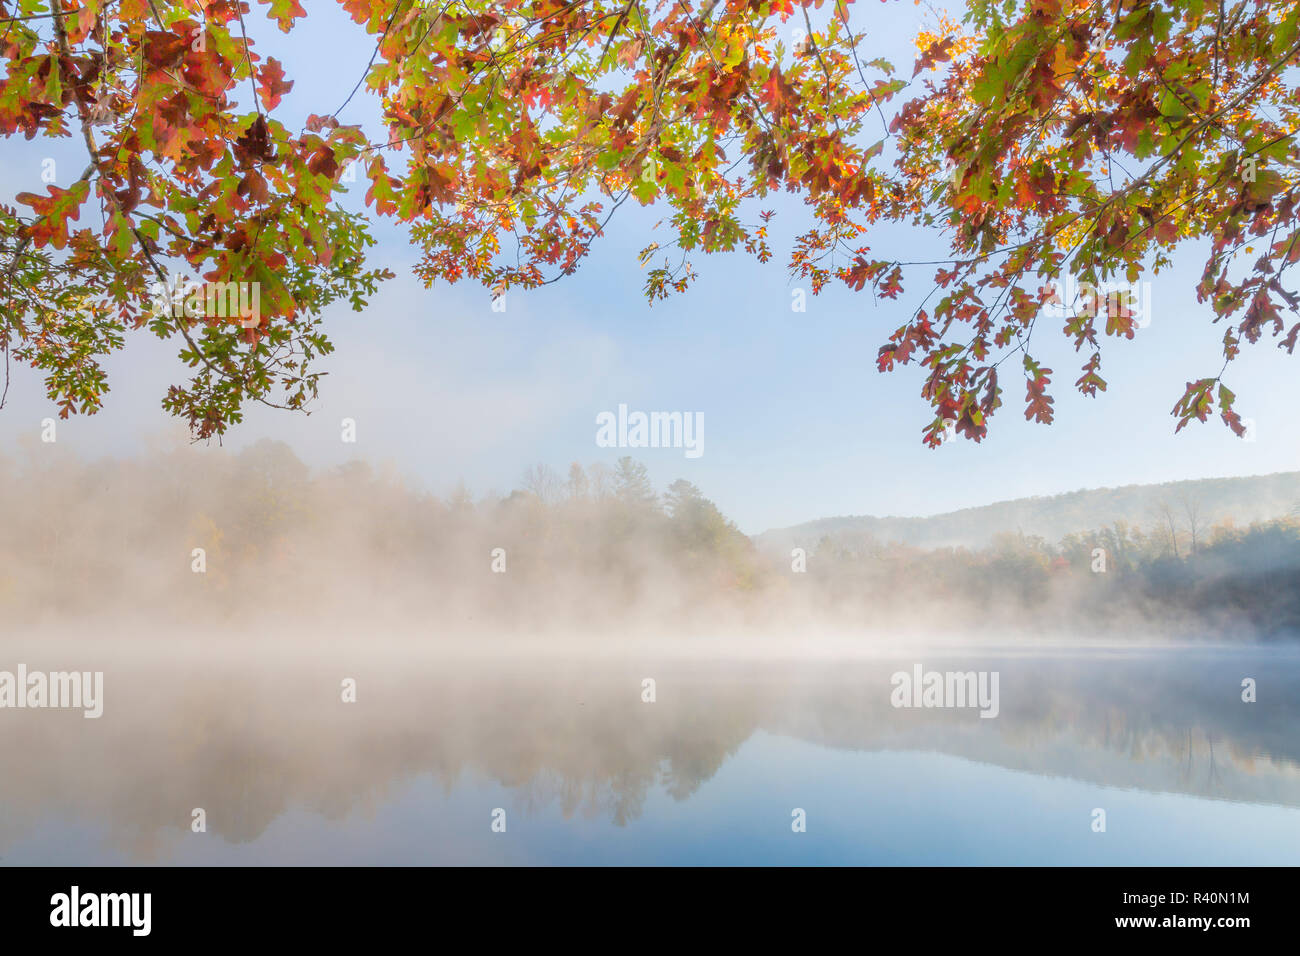 USA, Tennessee. Morning on Indian Boundary Lake. Stock Photo